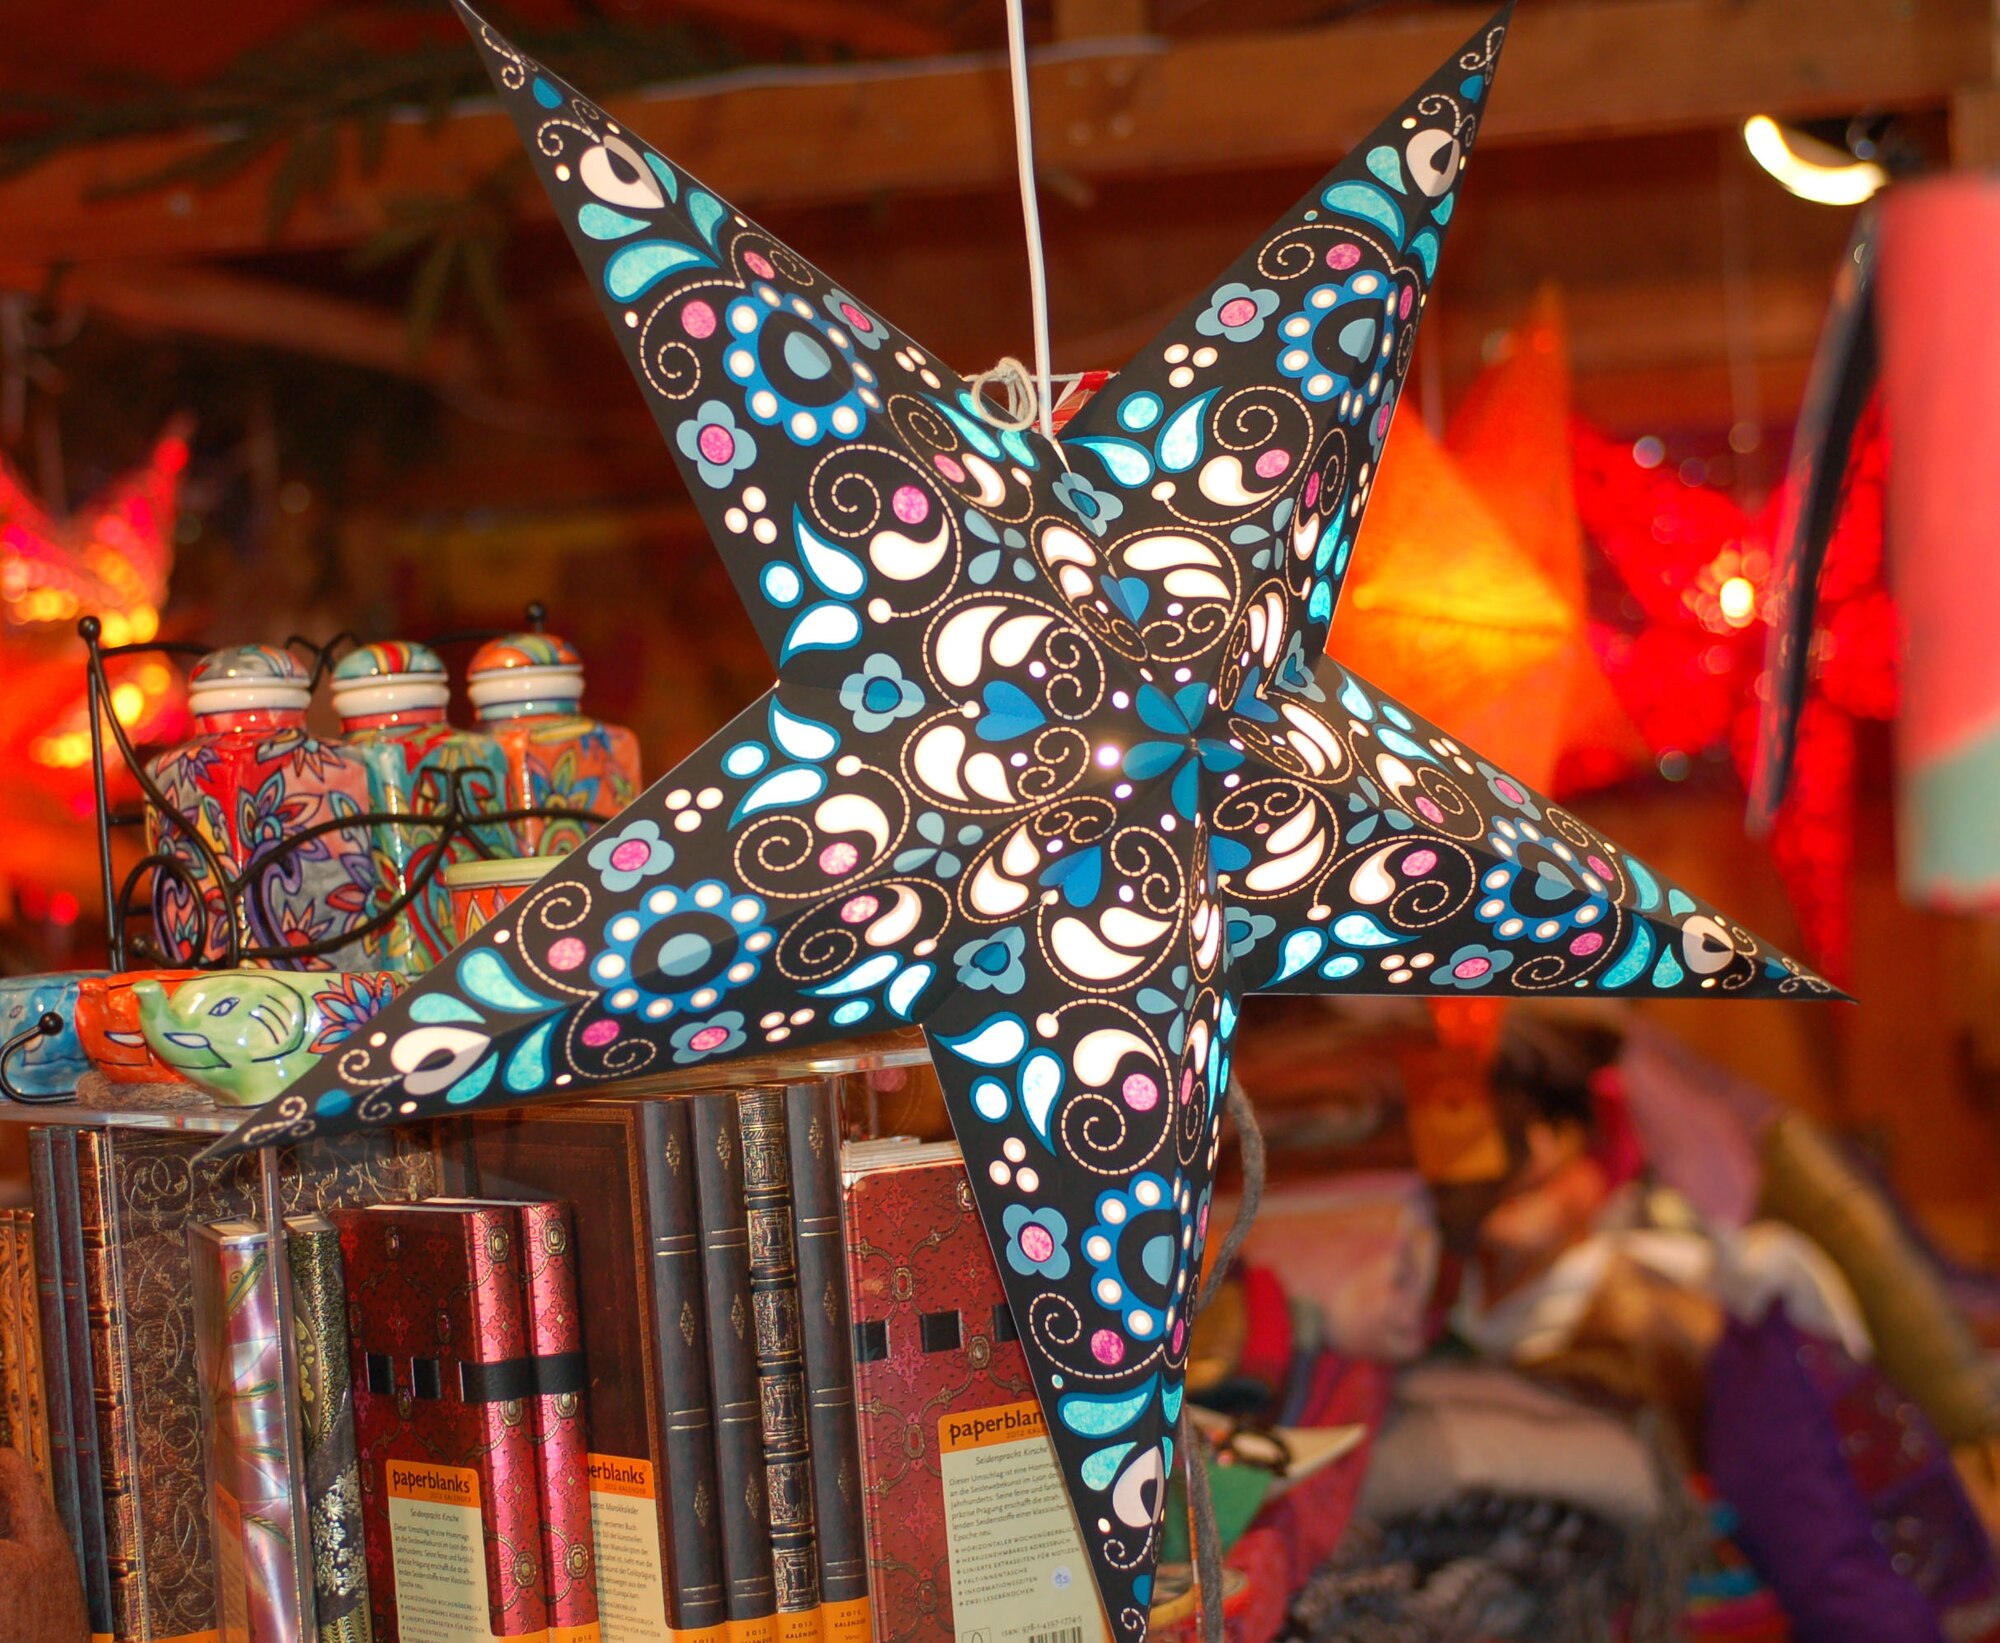 SPANGDAHLEM AIR BASE, Germany--Glass ornaments like this star are popular items that people can find at local Christmas markets. Other popular gift items are pyramids, nutcrackers, incense smokers, music boxes and figurines. (U.S. Air Force photo by Iris Reiff/Released)